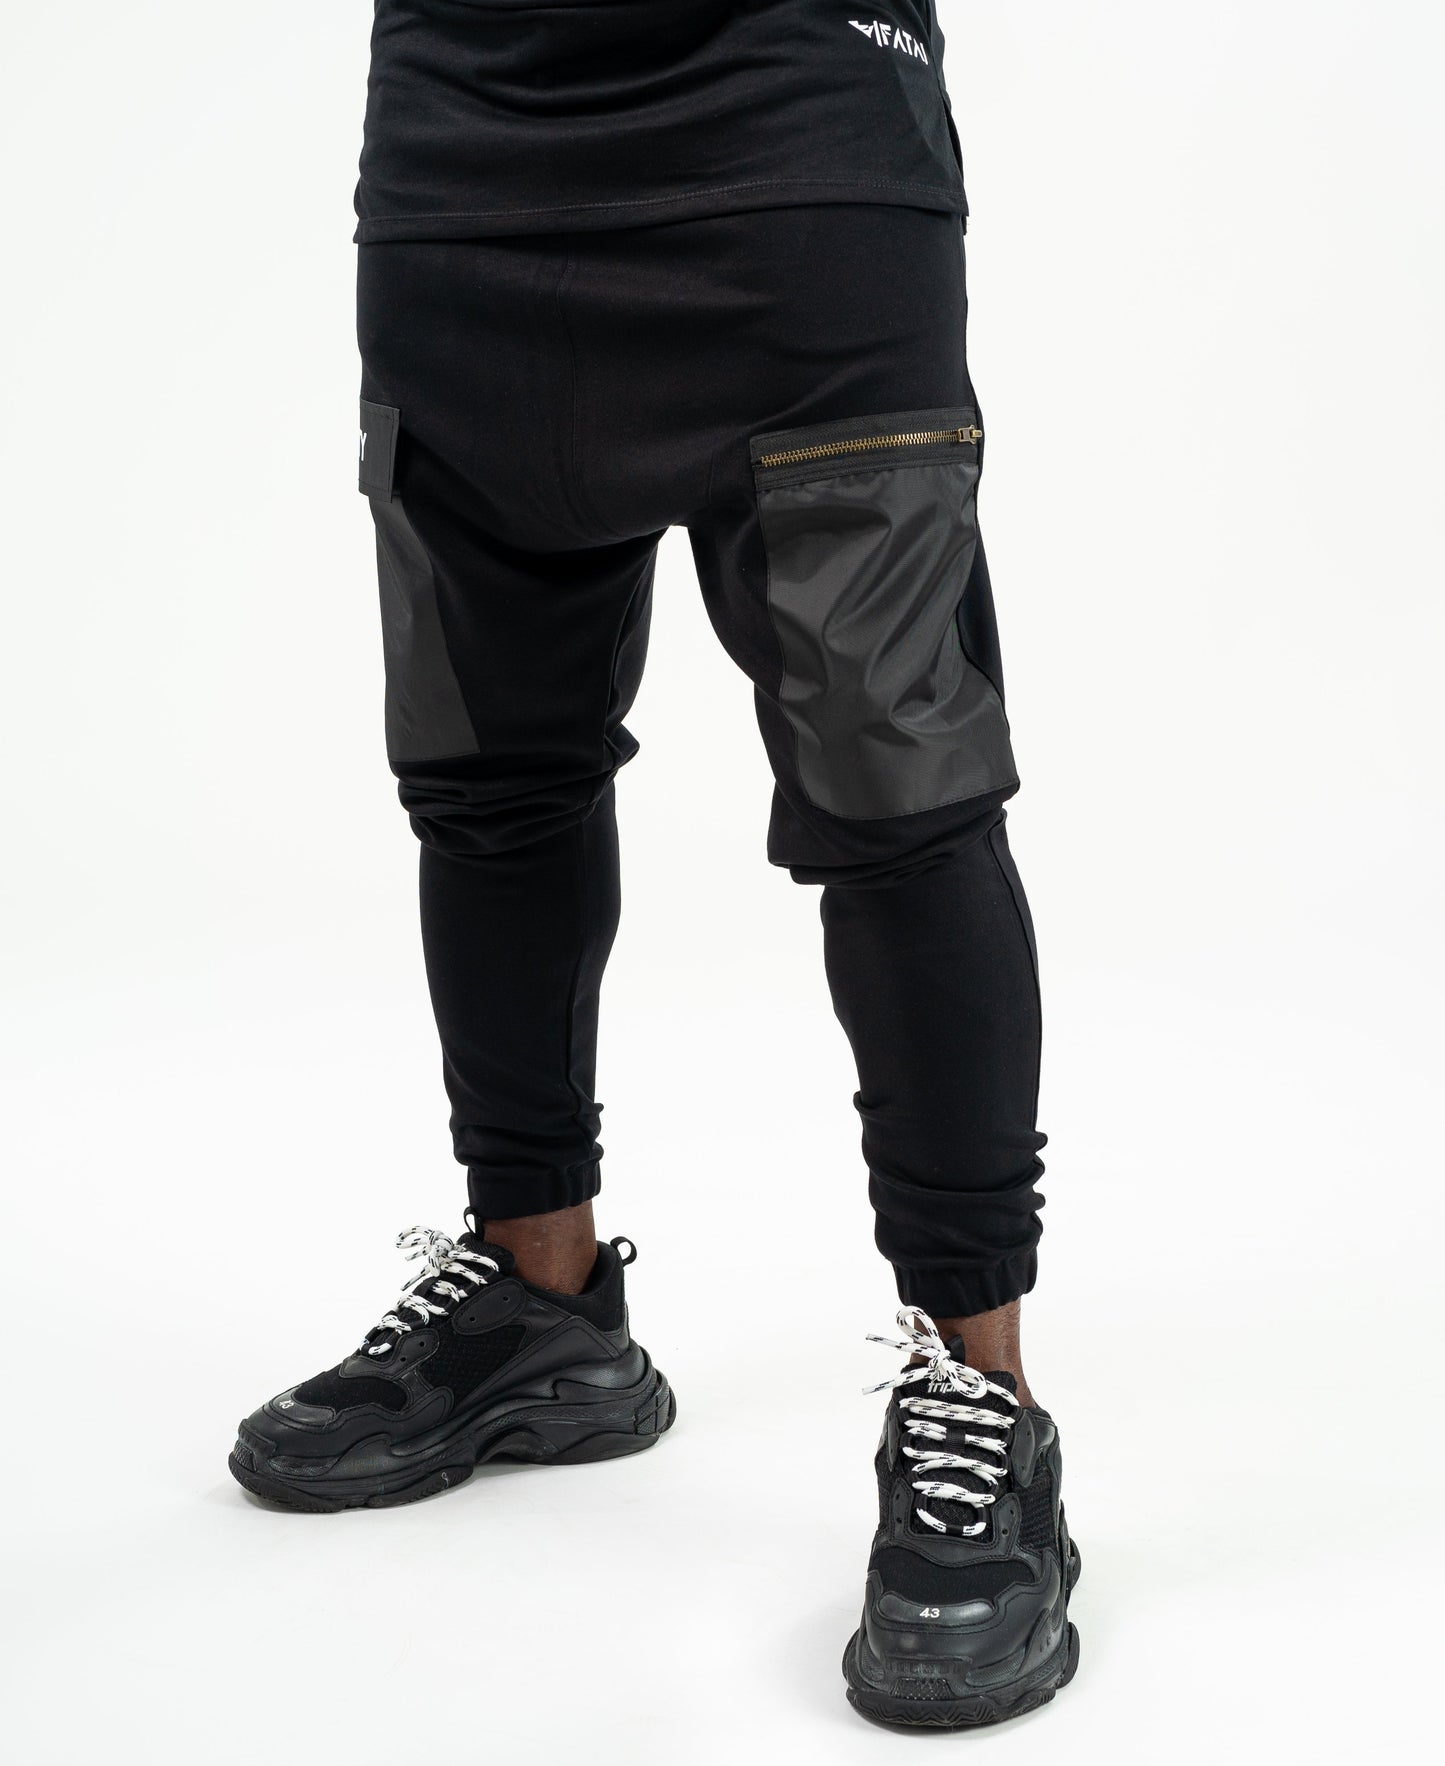 Black trousers with safety message - Fatai Style